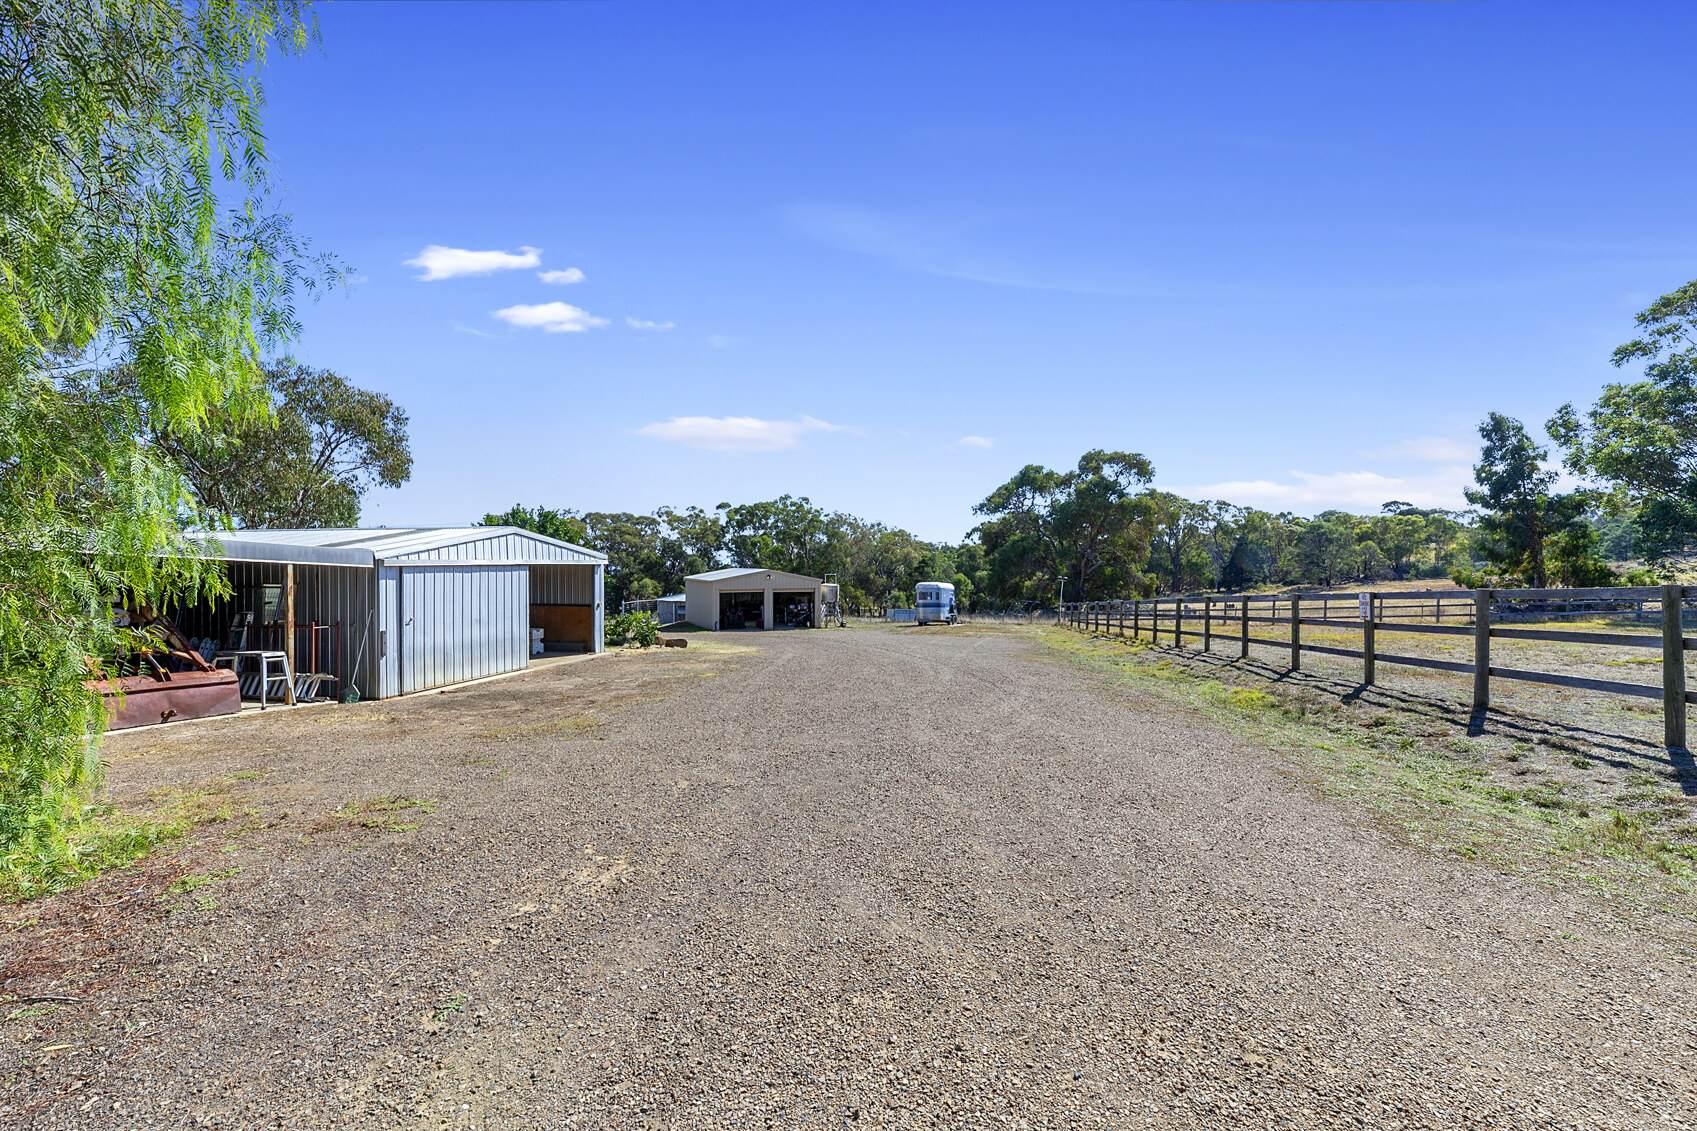 rural property for sale Victoria north-east 